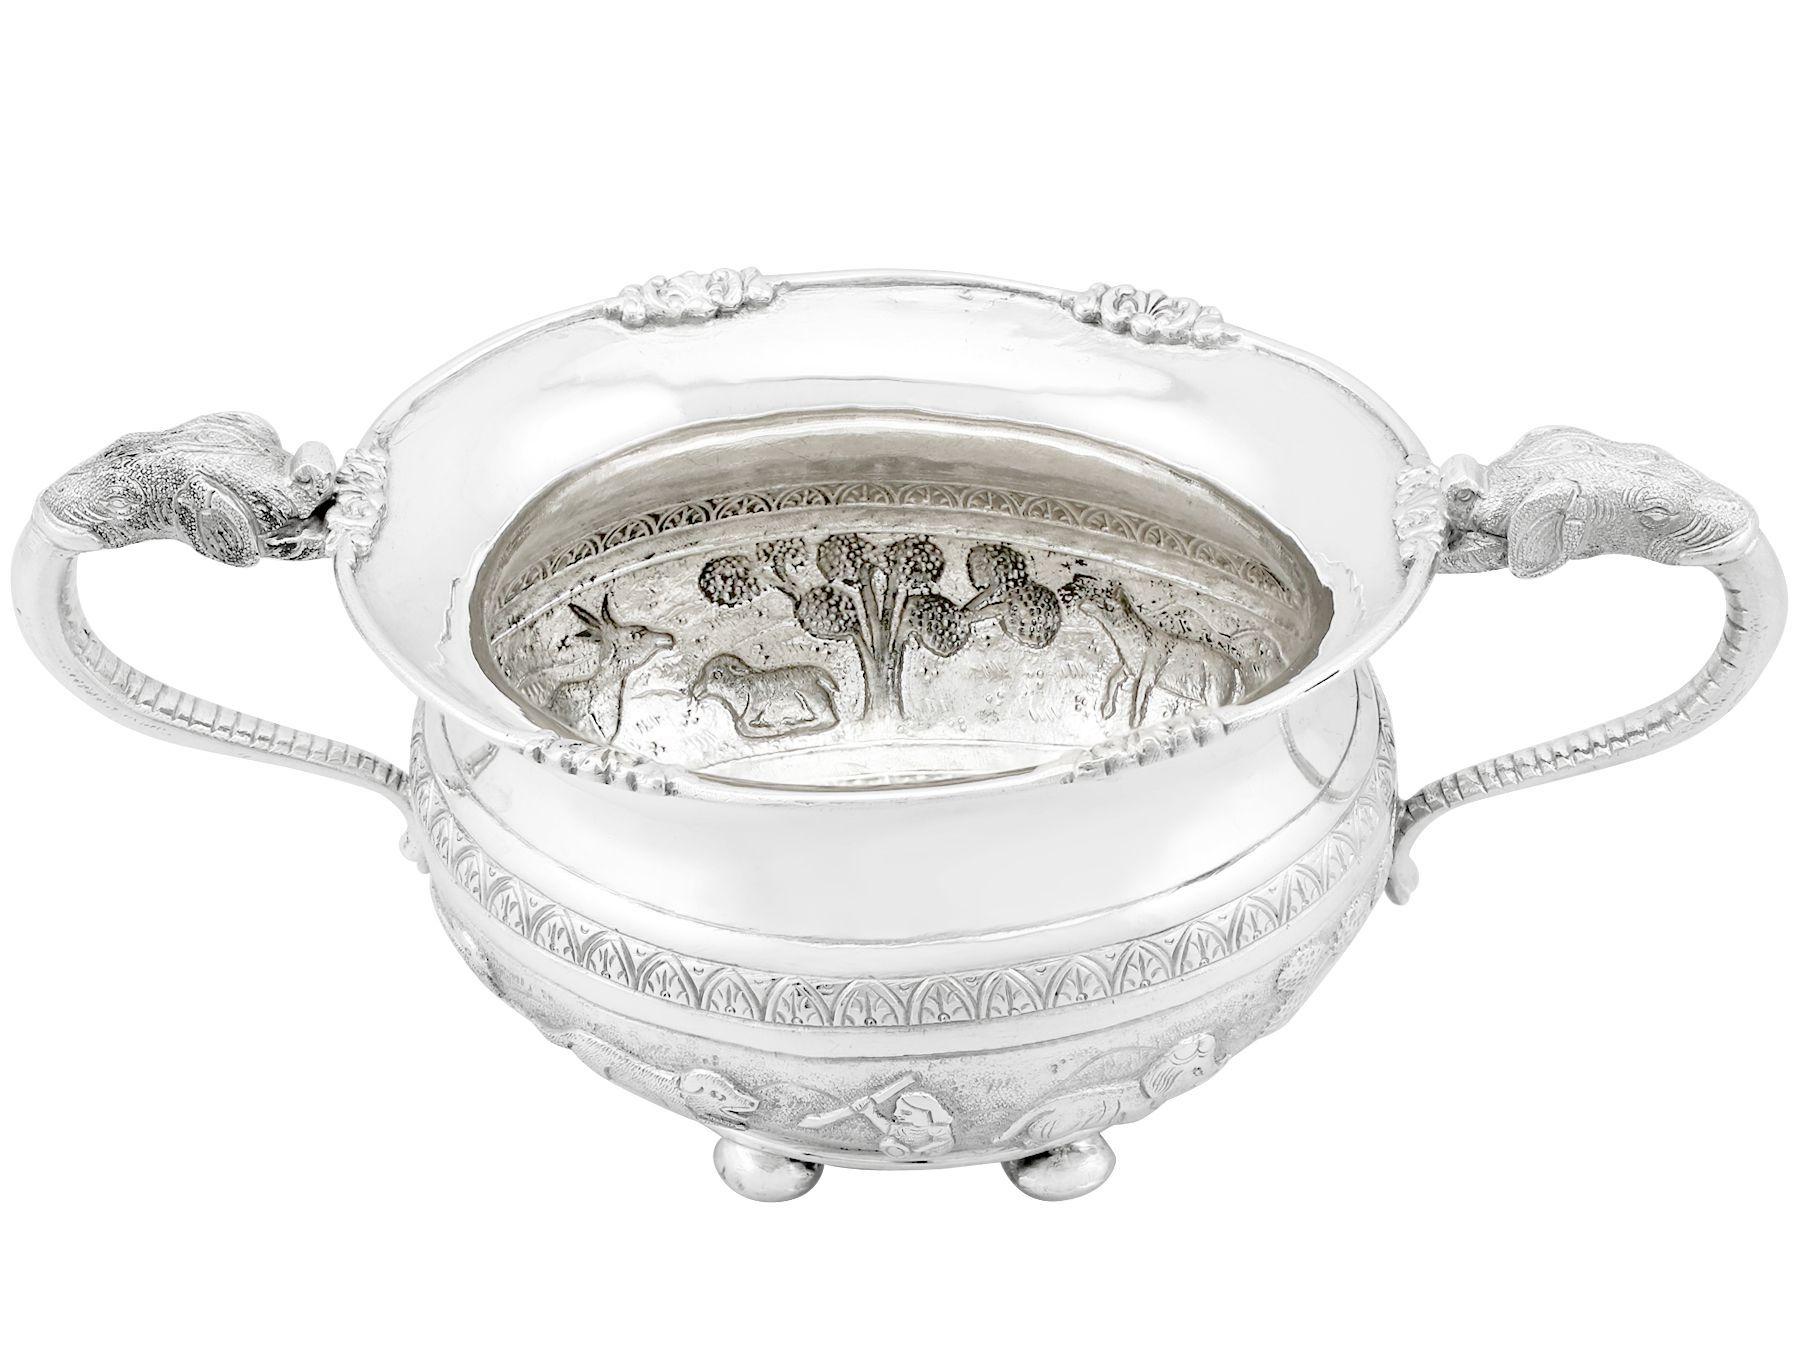 An exceptional, fine and impressive antique Indian silver sugar bowl; an addition to our silver teaware collection.

This exceptional antique Indian silver sugar bowl has a circular rounded, compressed form.

The body of this silver bowl is